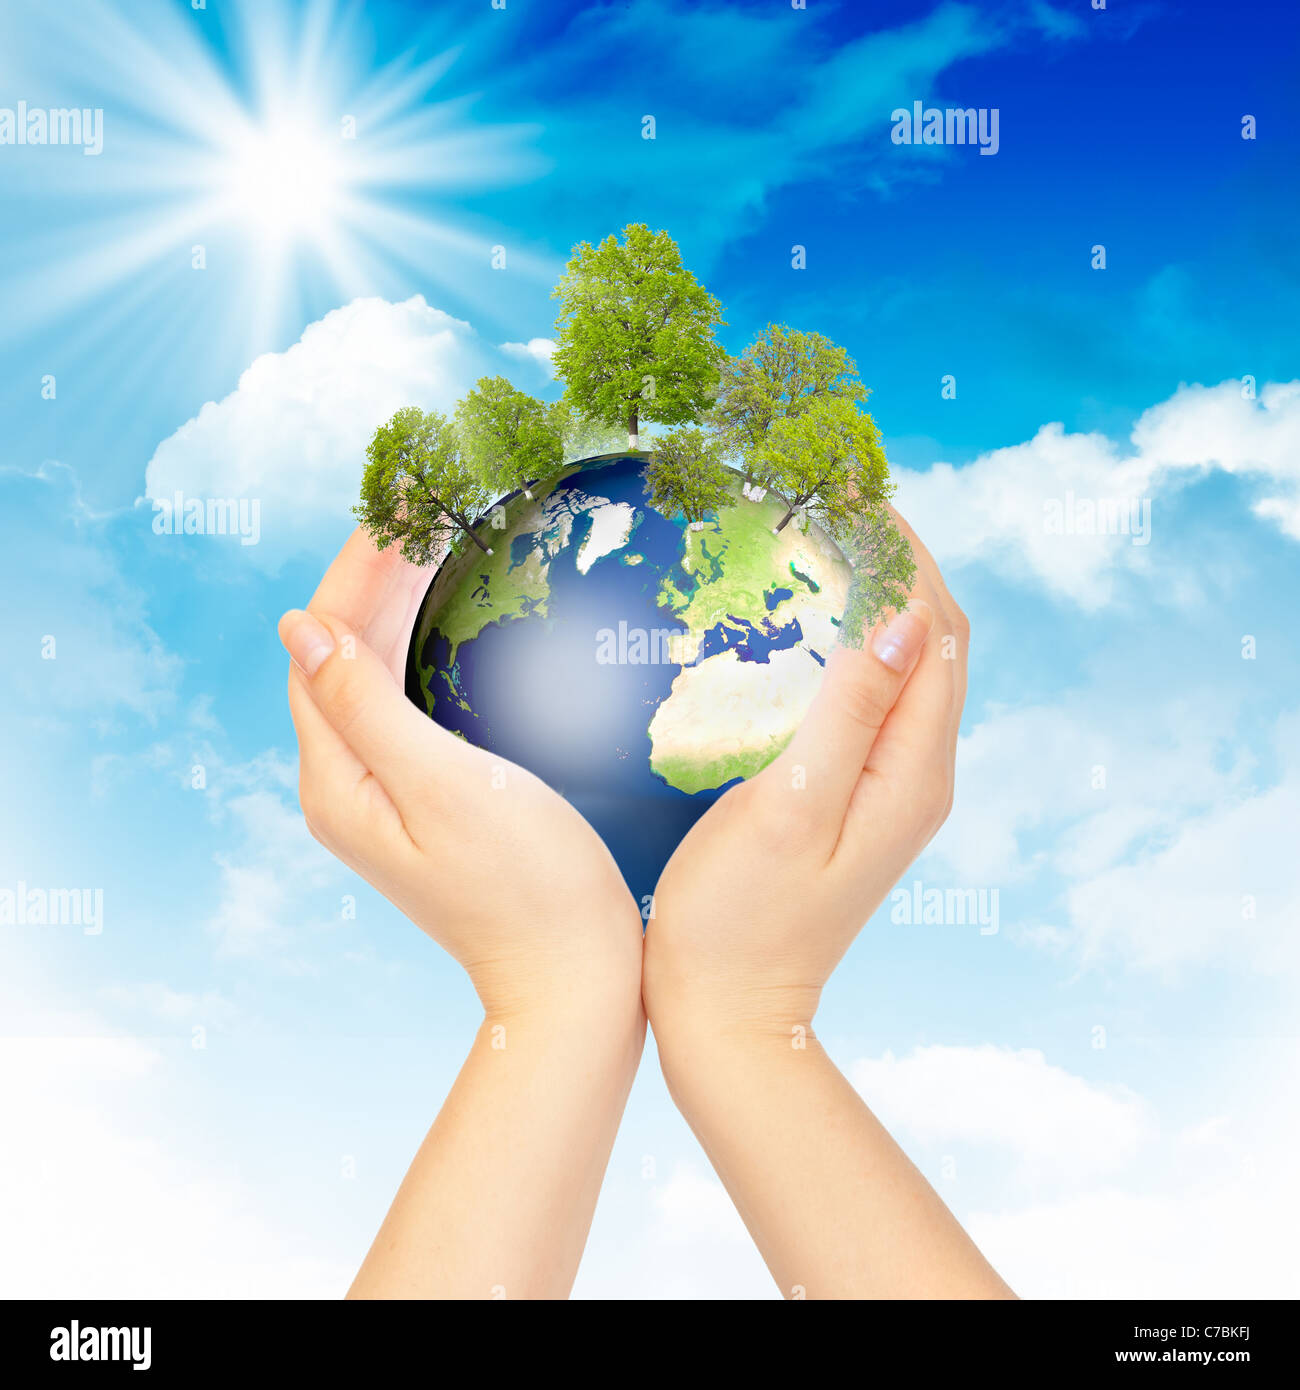 Hands and Earth. Concept Save green planet. Symbol of environmental protection. Stock Photo